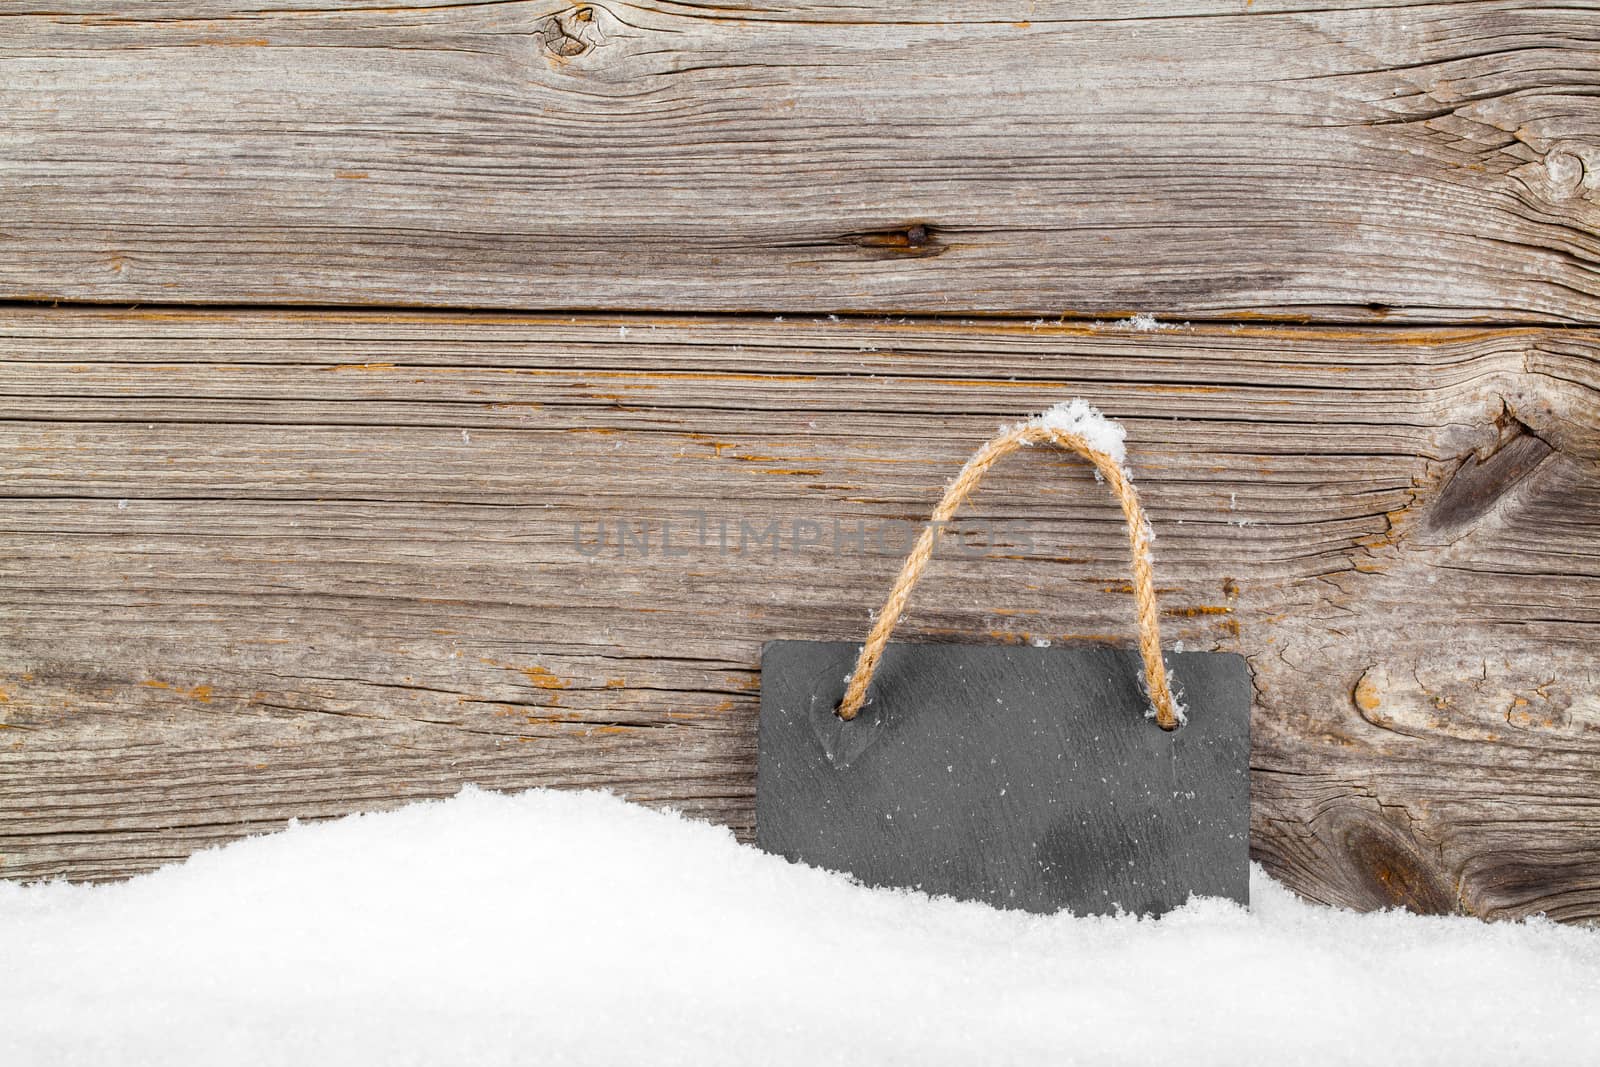 Black board of slate on old rustic wooden background, with snow by motorolka